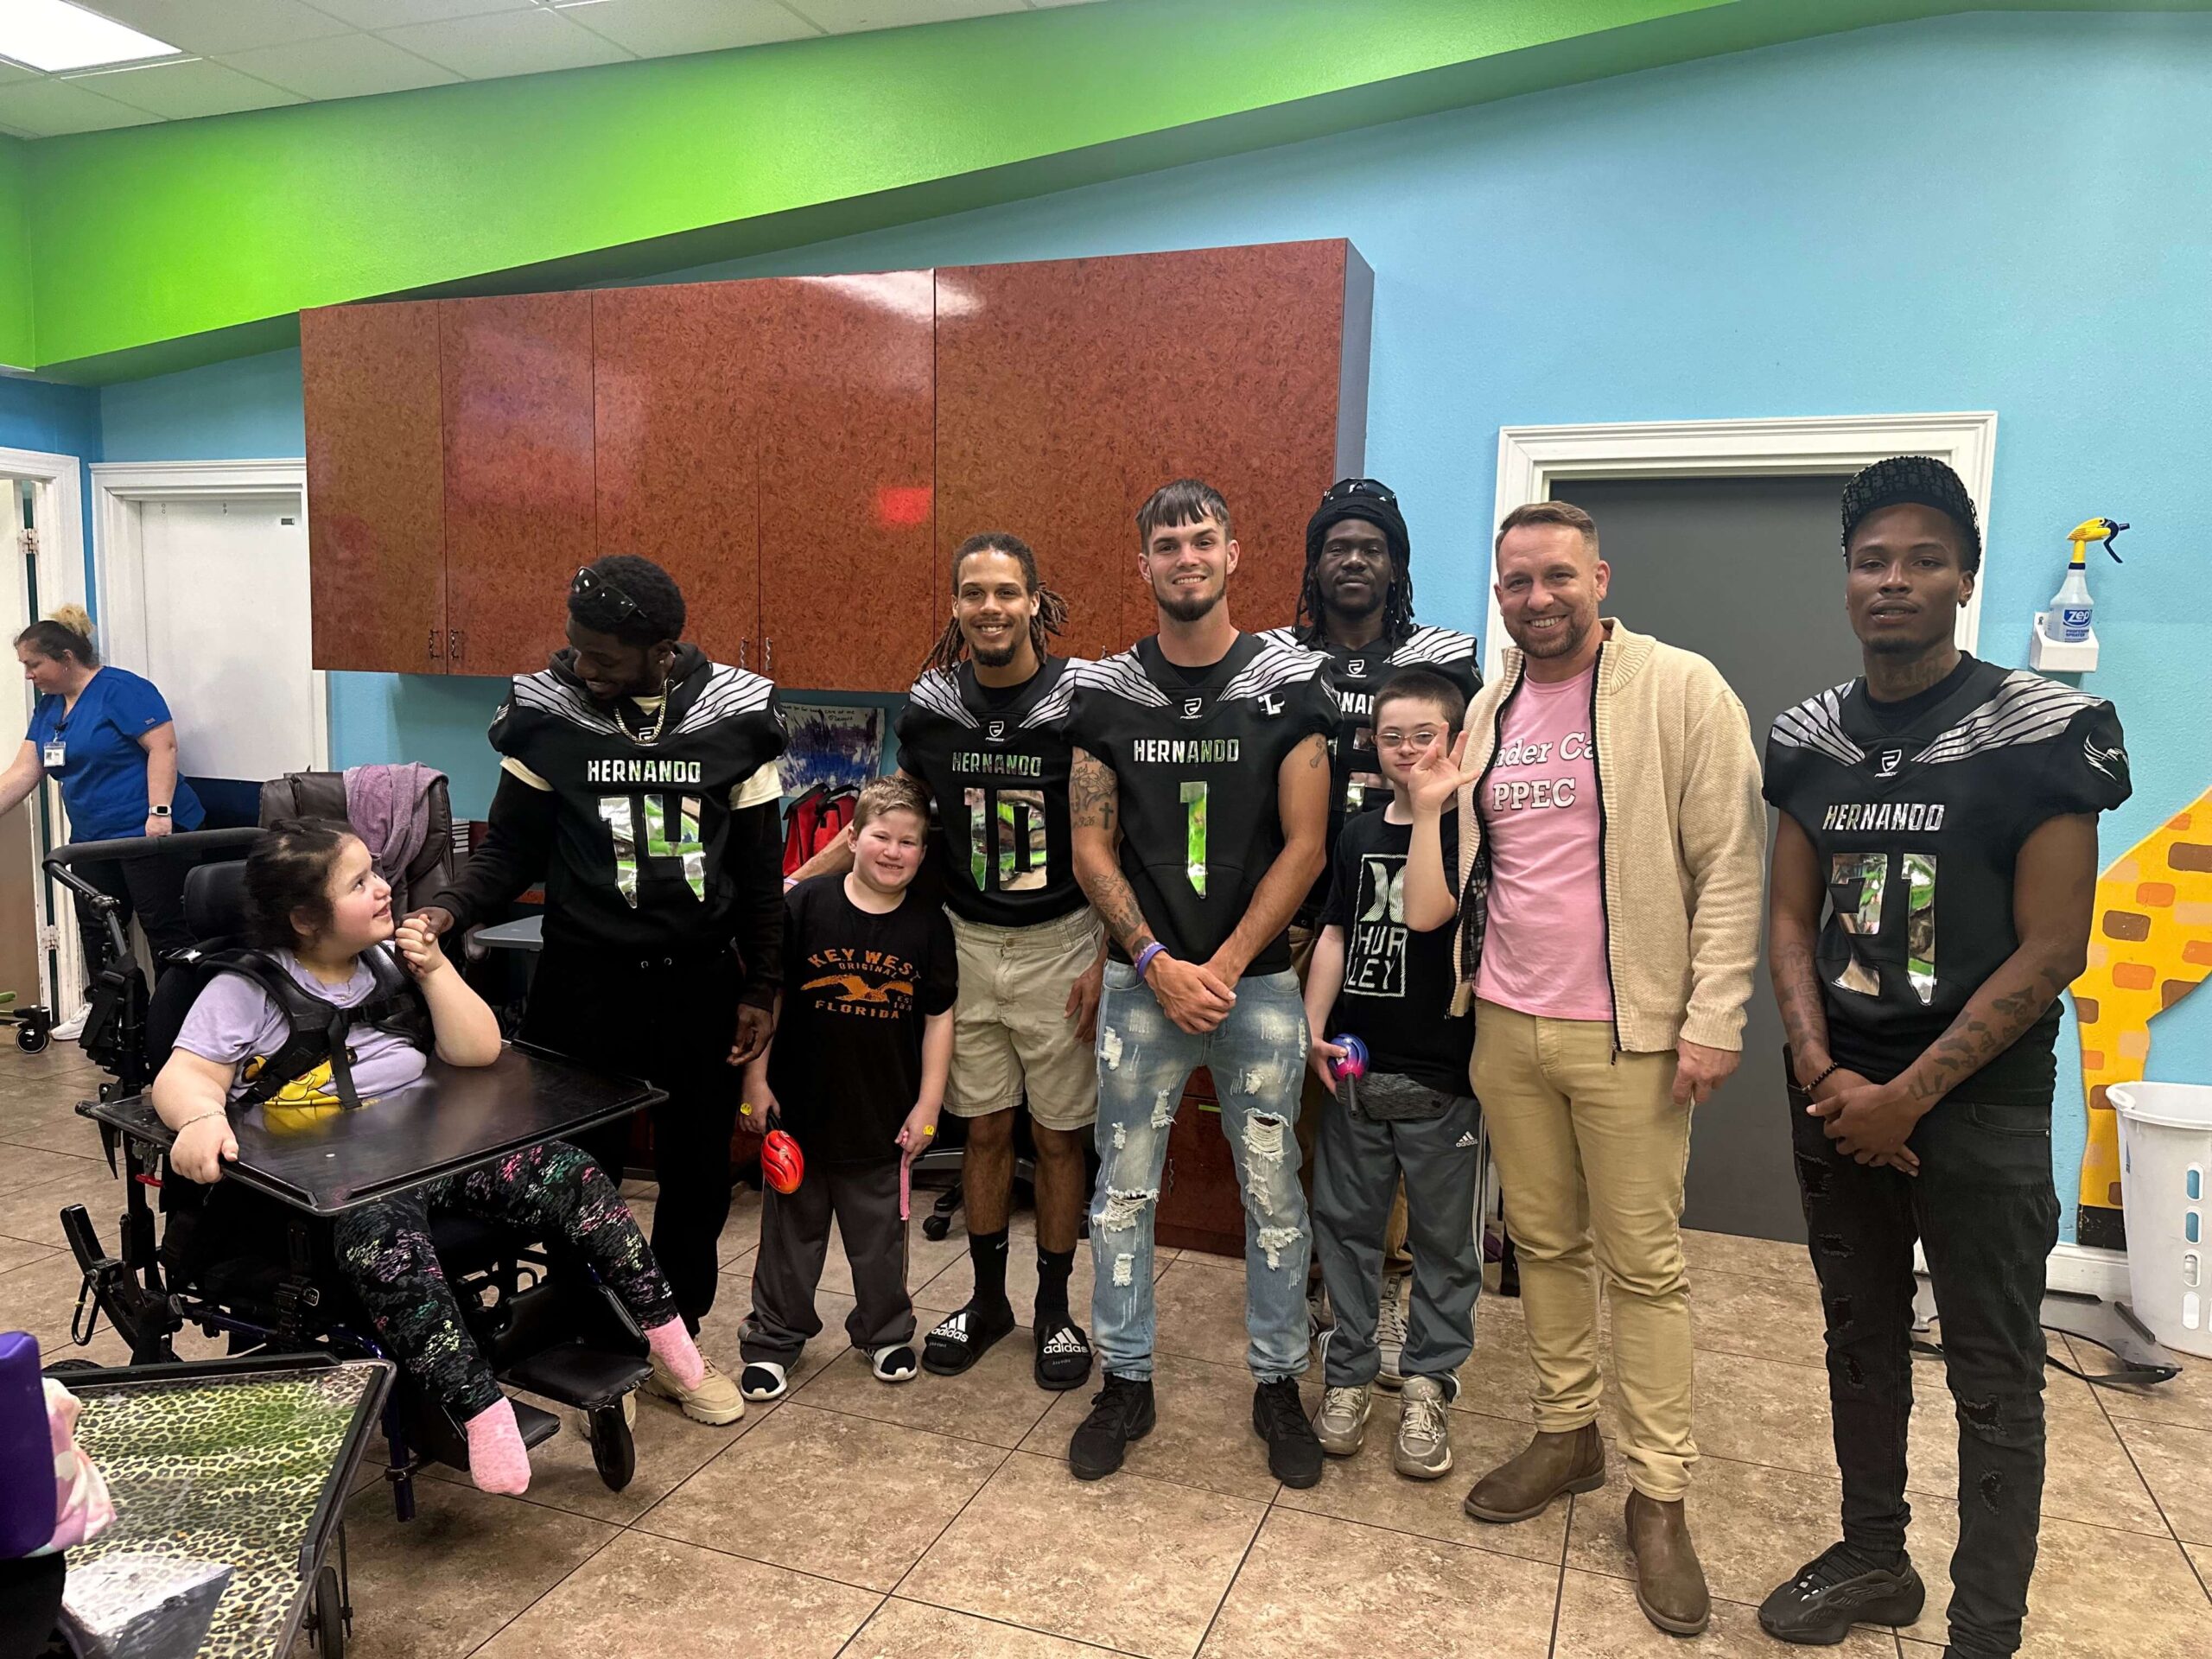 The Hernando County Hawks Came to Visit Tender Care’s Spring Hill Center!